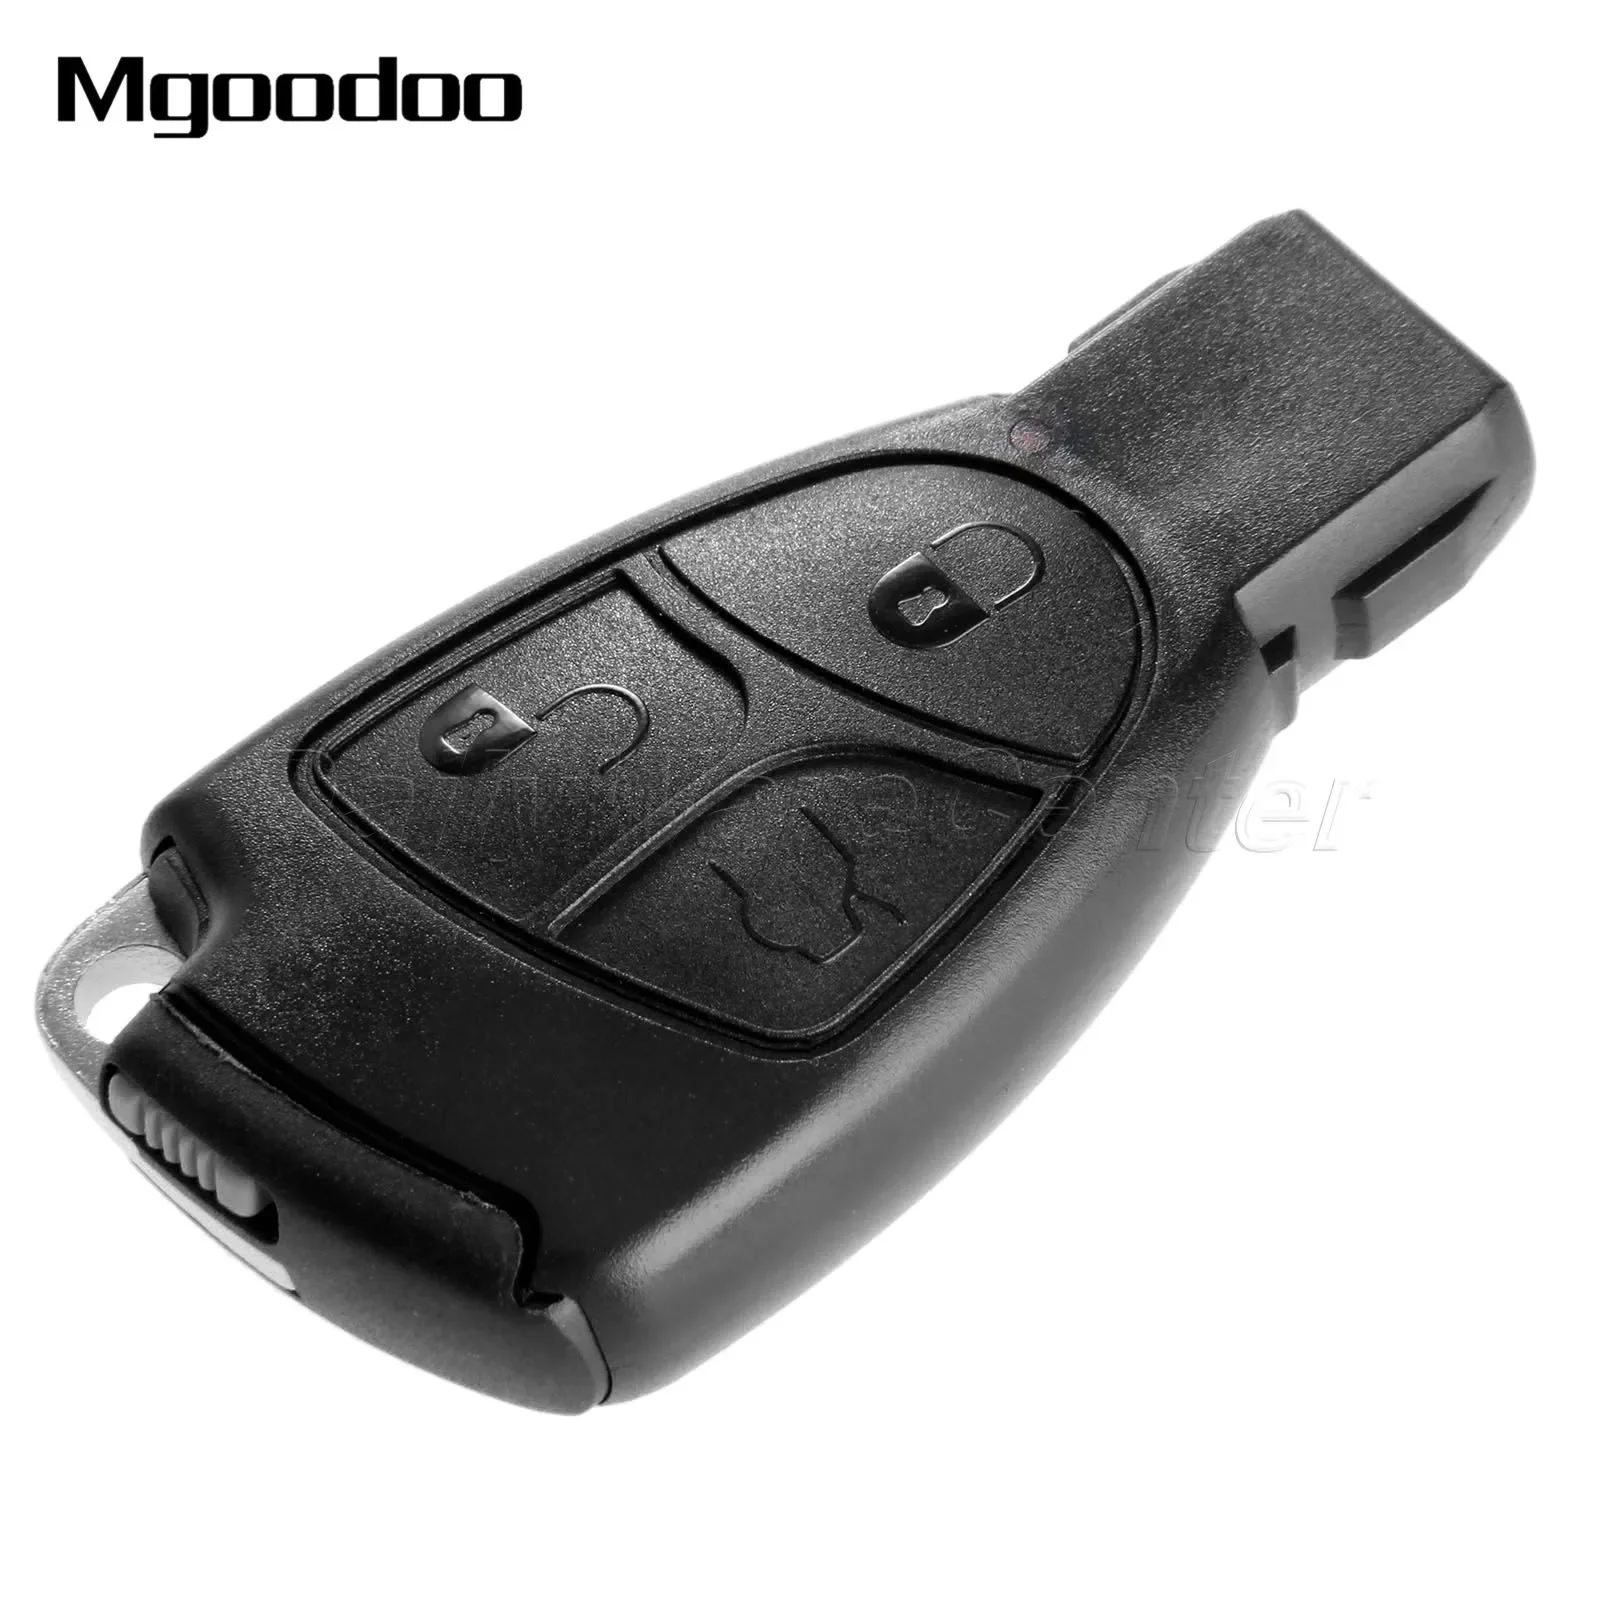 

3 Buttons Smart Car Remote Key Case Fob Shell Replacement For Mercedes Benz C E B S Class CLS CLK SLK ML CL Insert Uncut Blade